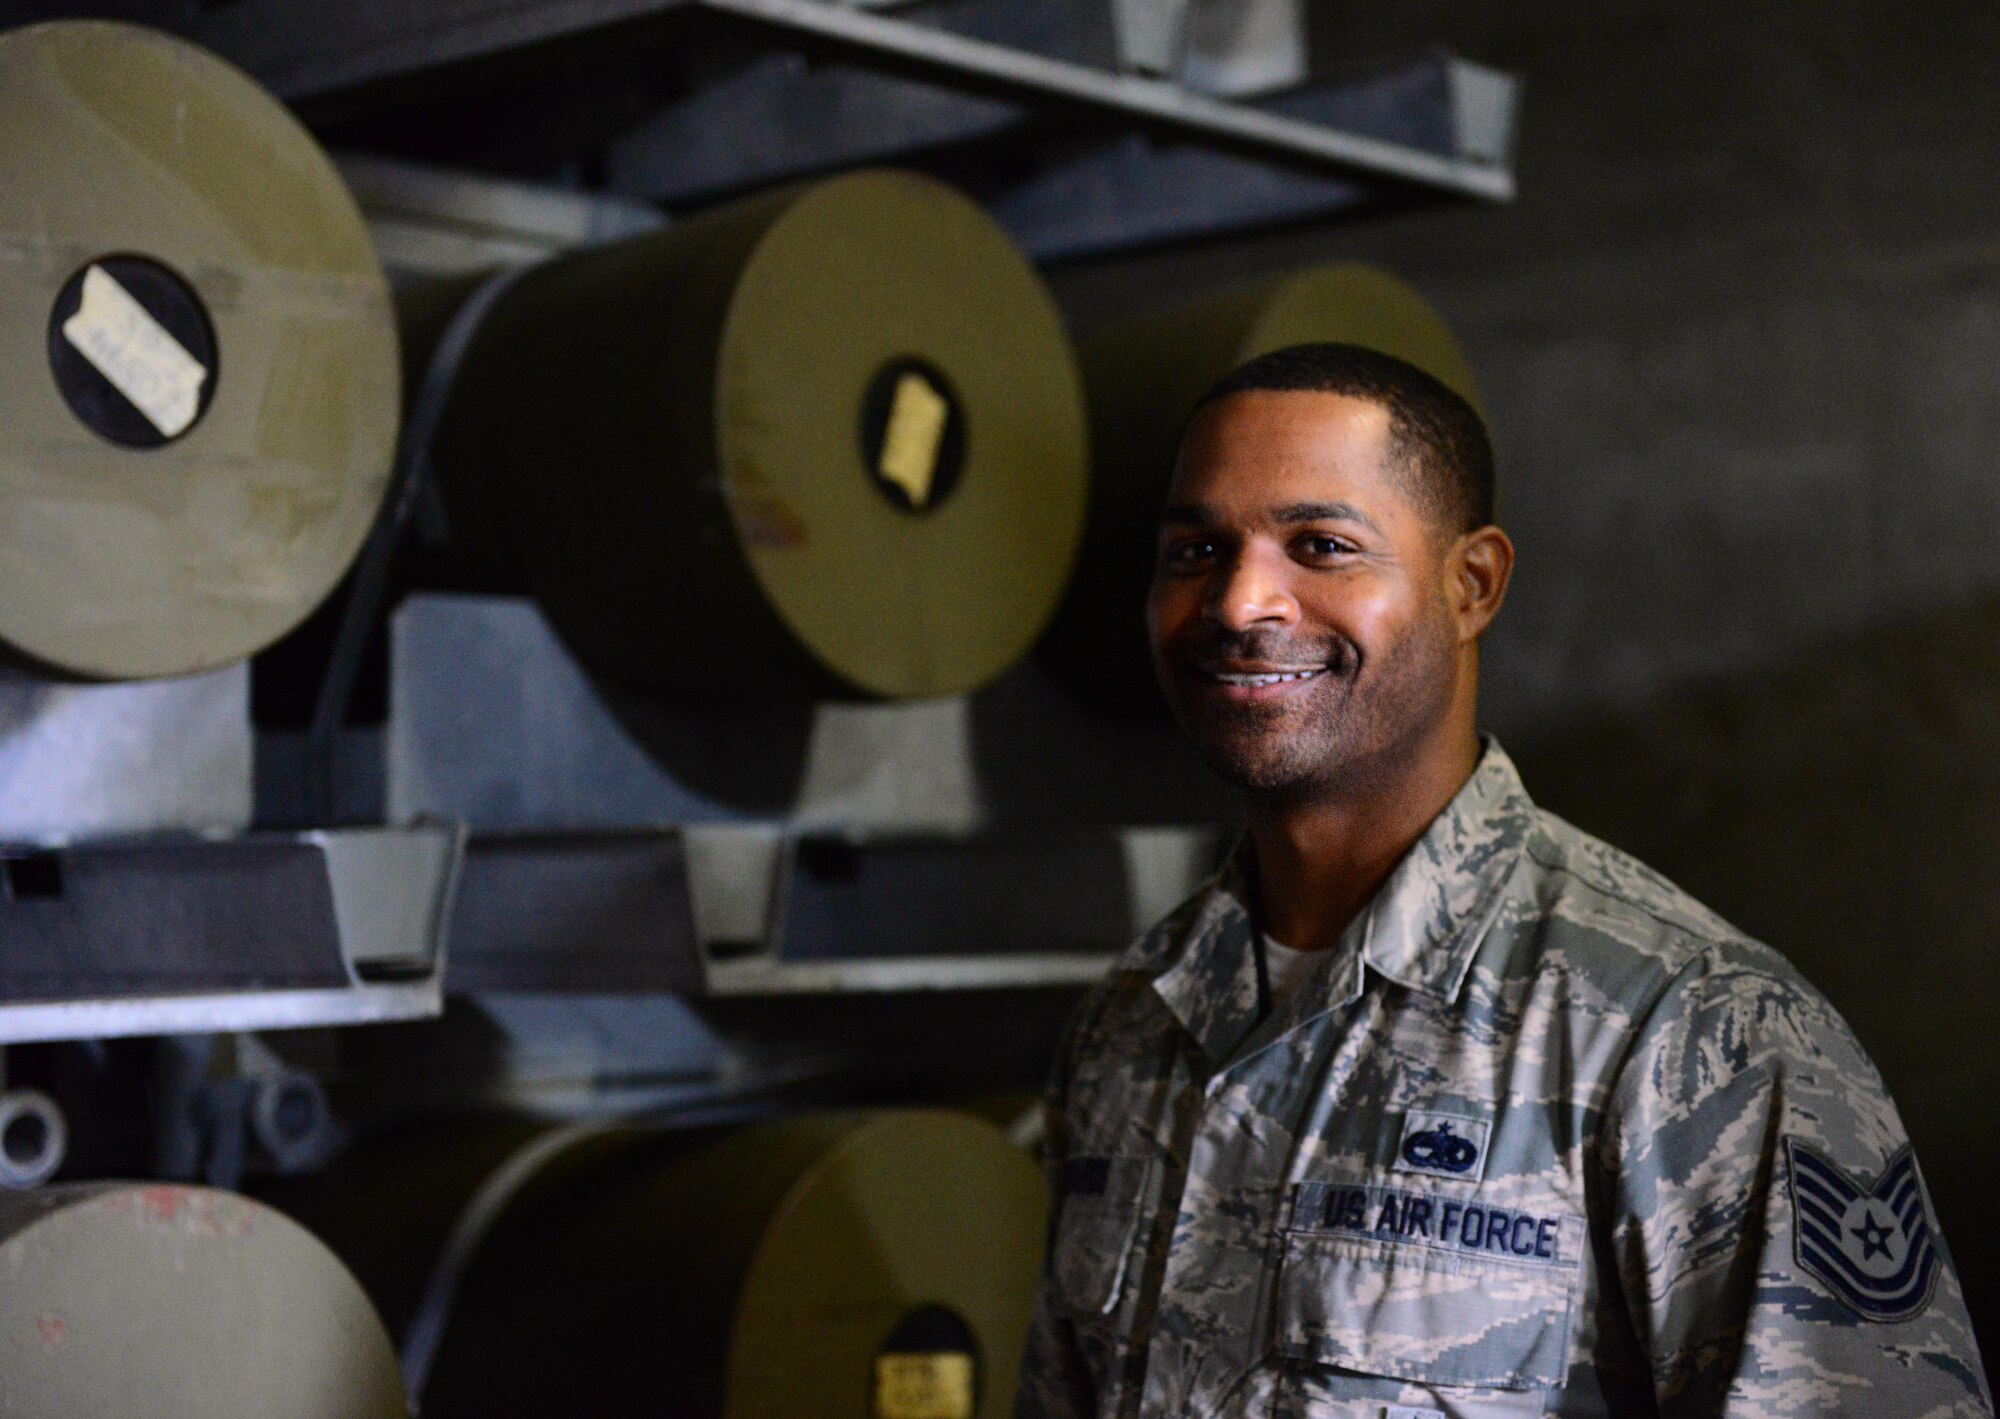 Tech. Sgt. Dan Edwards, 51st Munitions Squadron storage shift lead, poses in front of munition pallets stacked high at Osan Air Base, Republic of Korea, Nov. 17, 2015. MUNS Airmen are responsible for building, storing, maintaining, inspecting and delivering everything from 2,000 pound bombs to 9mm rounds. (U.S. Air Force photo by Staff Sgt. Amber Grimm/Released)